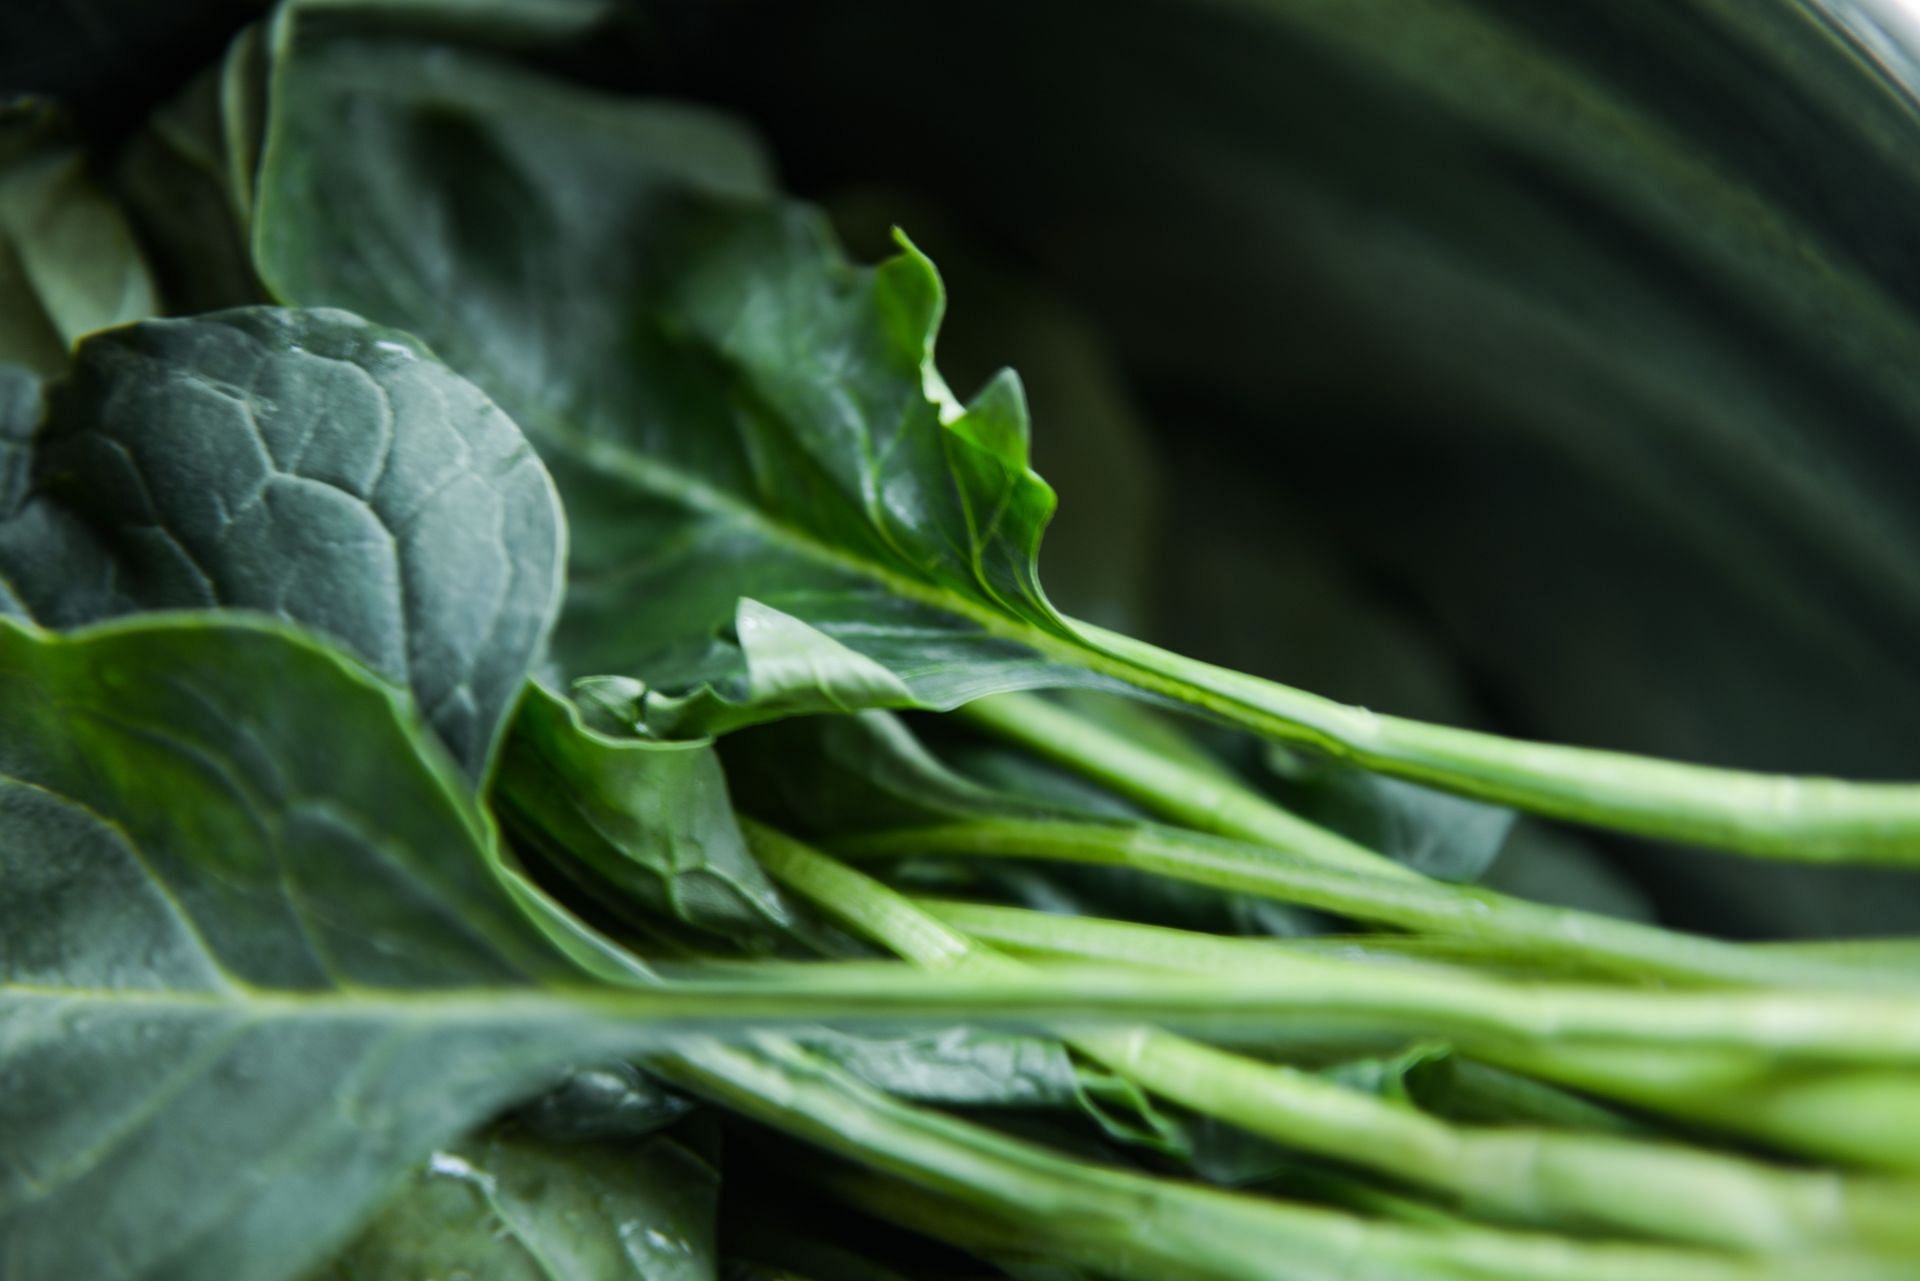 Leafy greens like spinach are a good source of potassium. (Image via Pexels/Cats Coming)